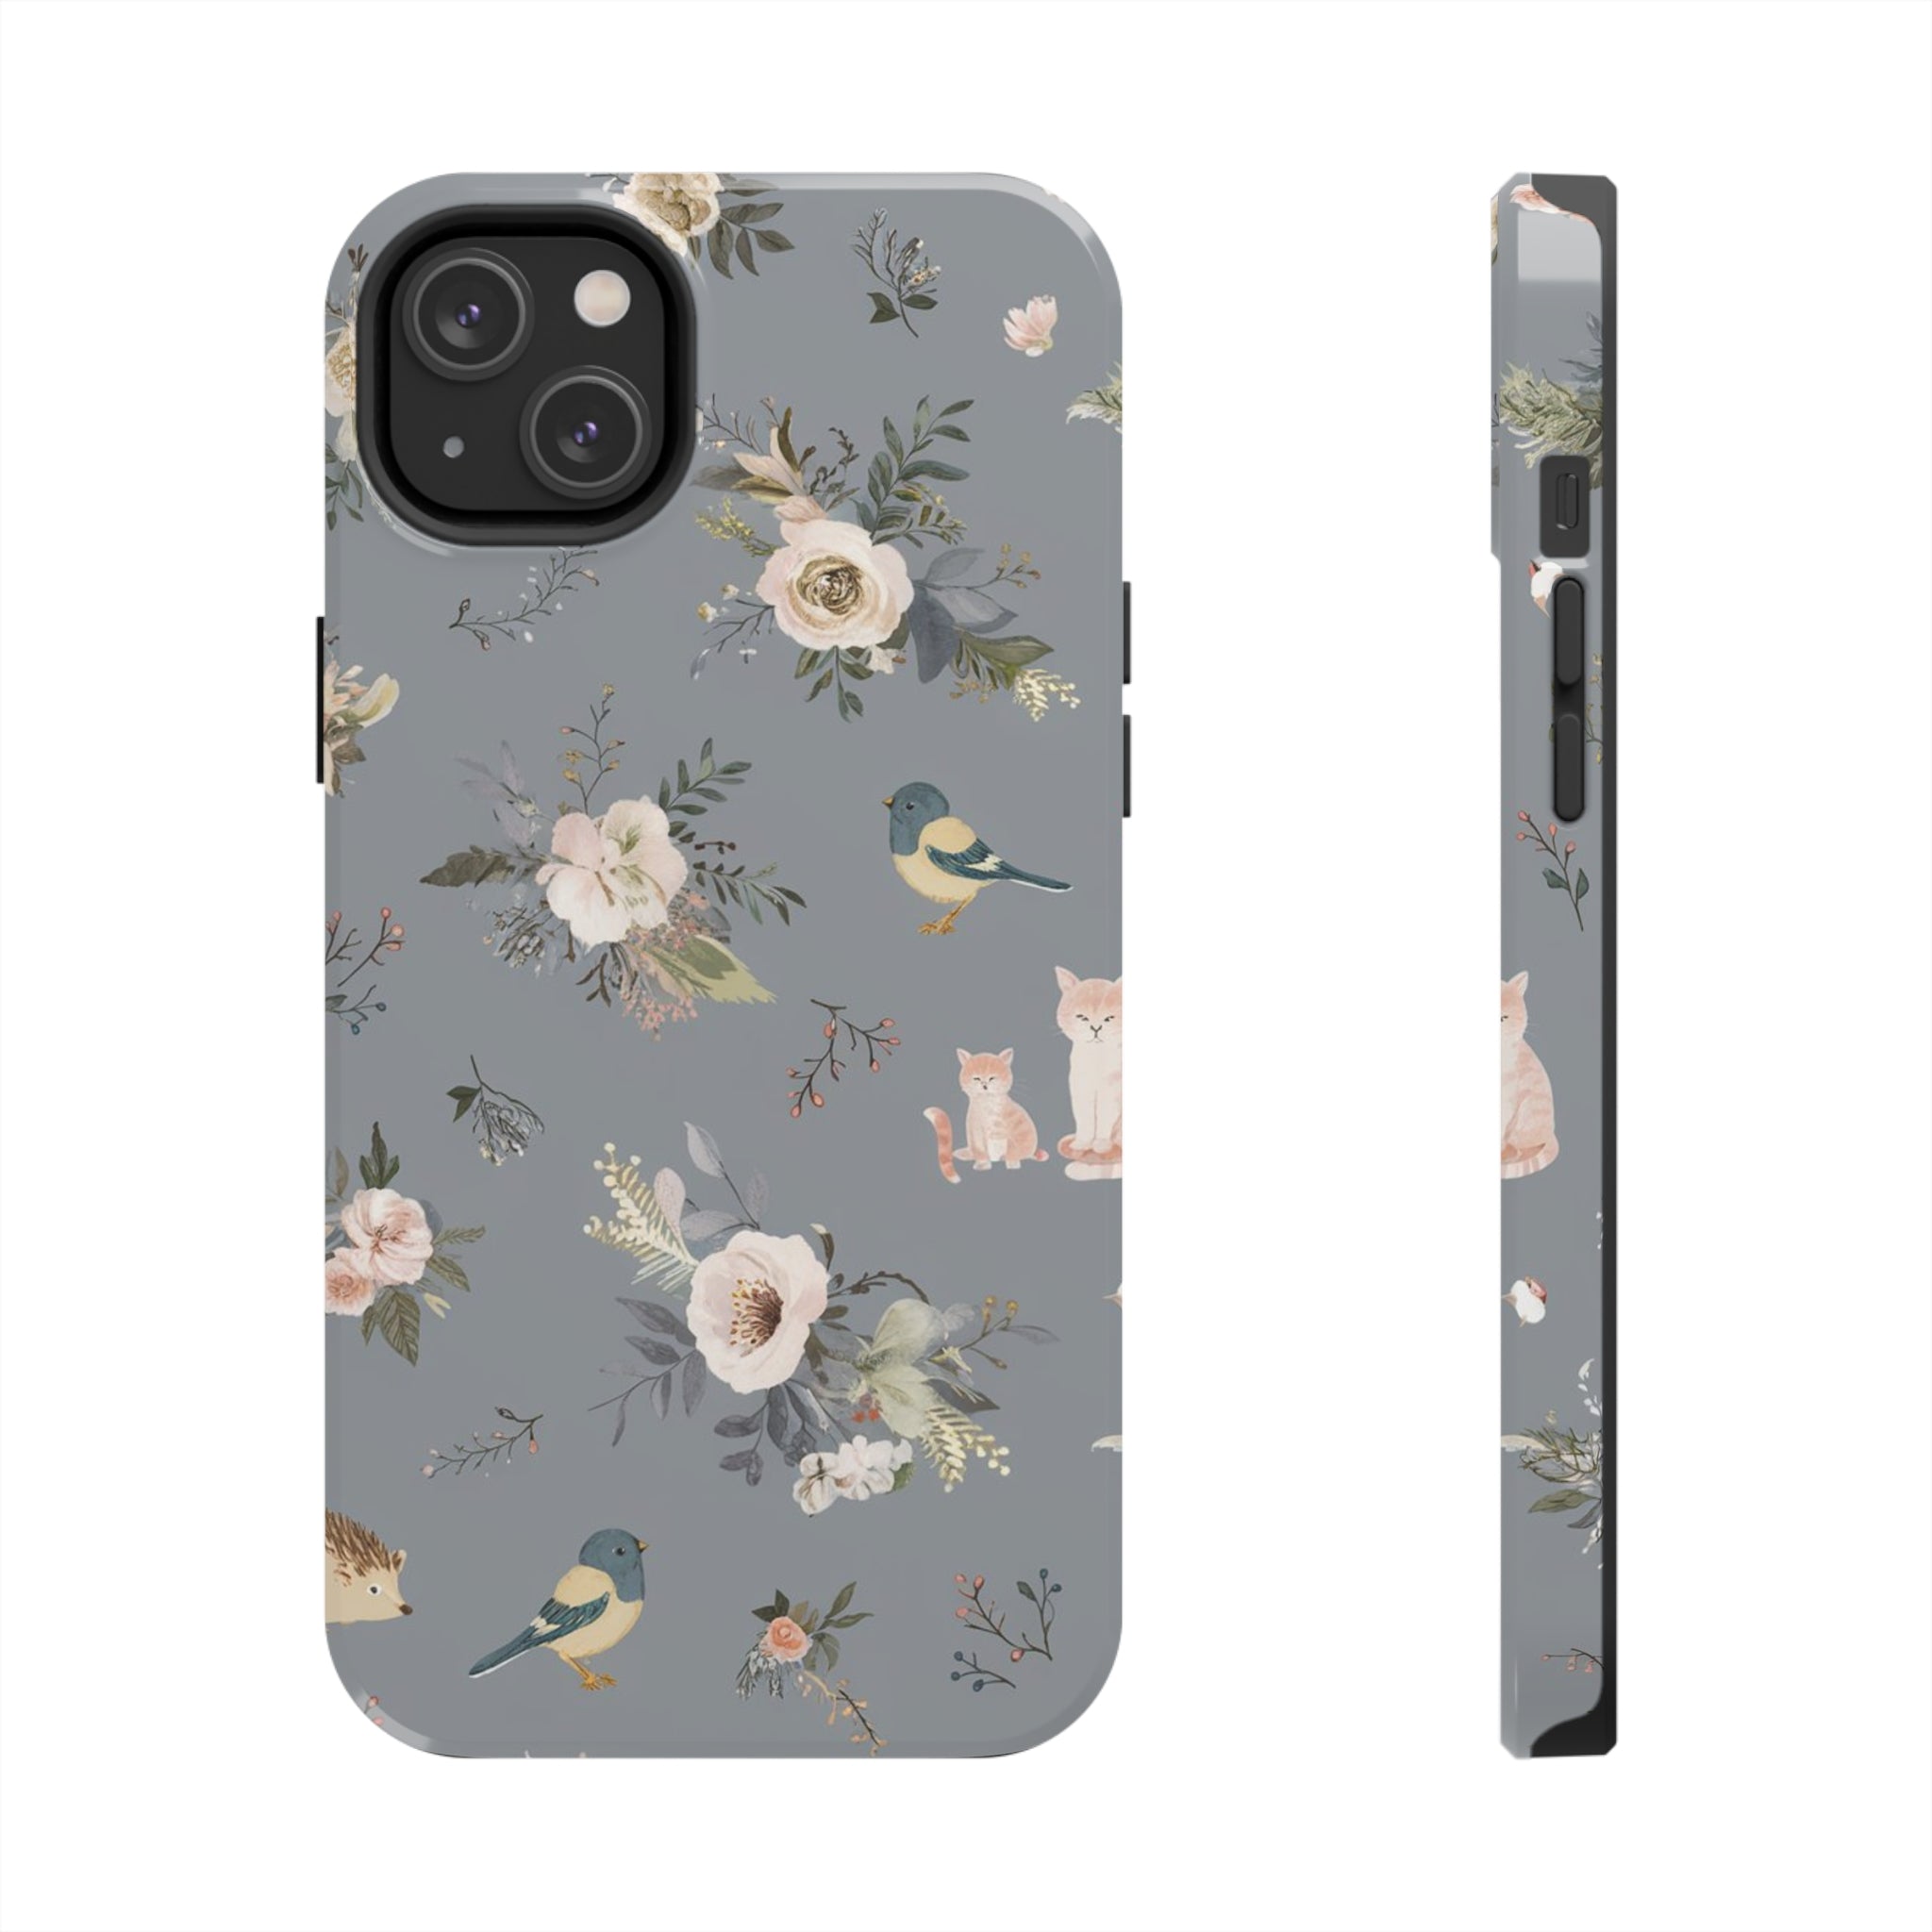 Cats and Birds - Tough Phone Cases